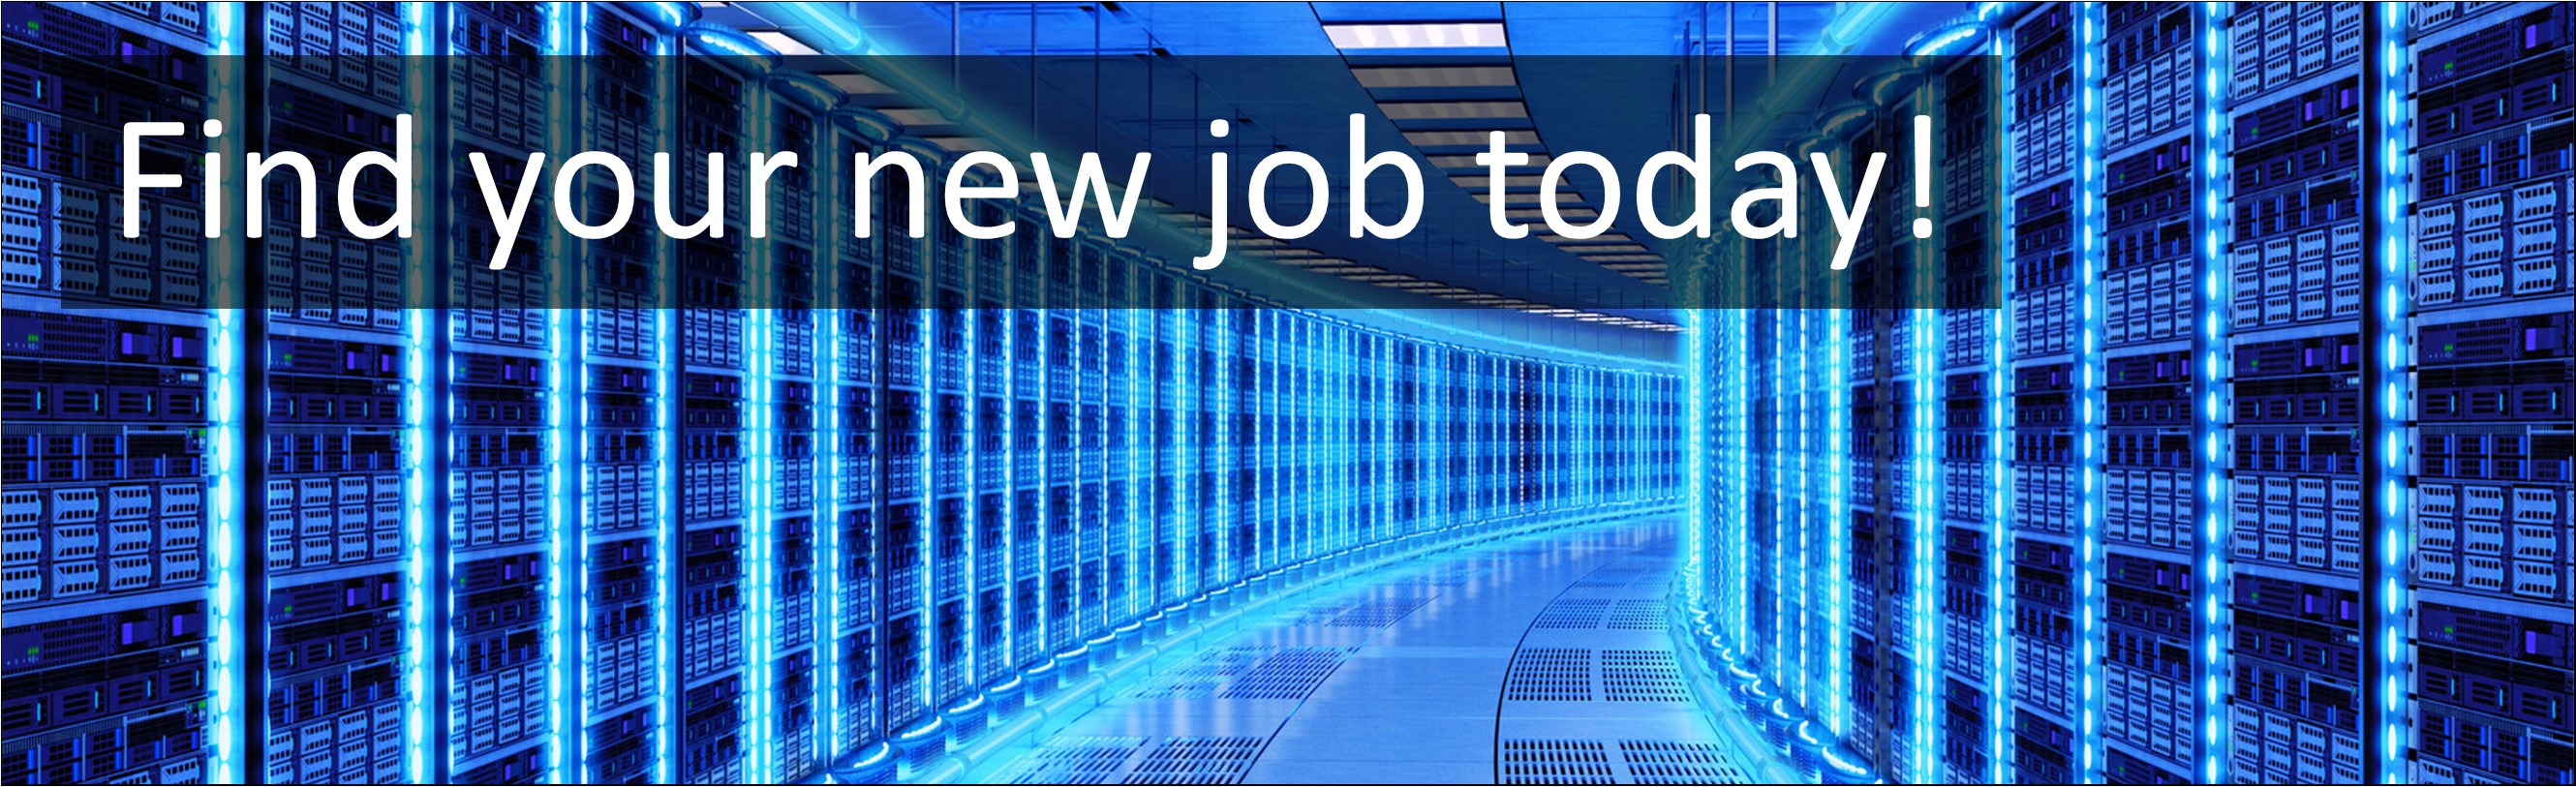 IT & Communication Jobs. First Line IT Helpdesk Support Engineer Jobs, Careers & Vacancies in Bristol, South West England Advertised by AWD online – Multi-Job Board Advertising and CV Sourcing Recruitment Services